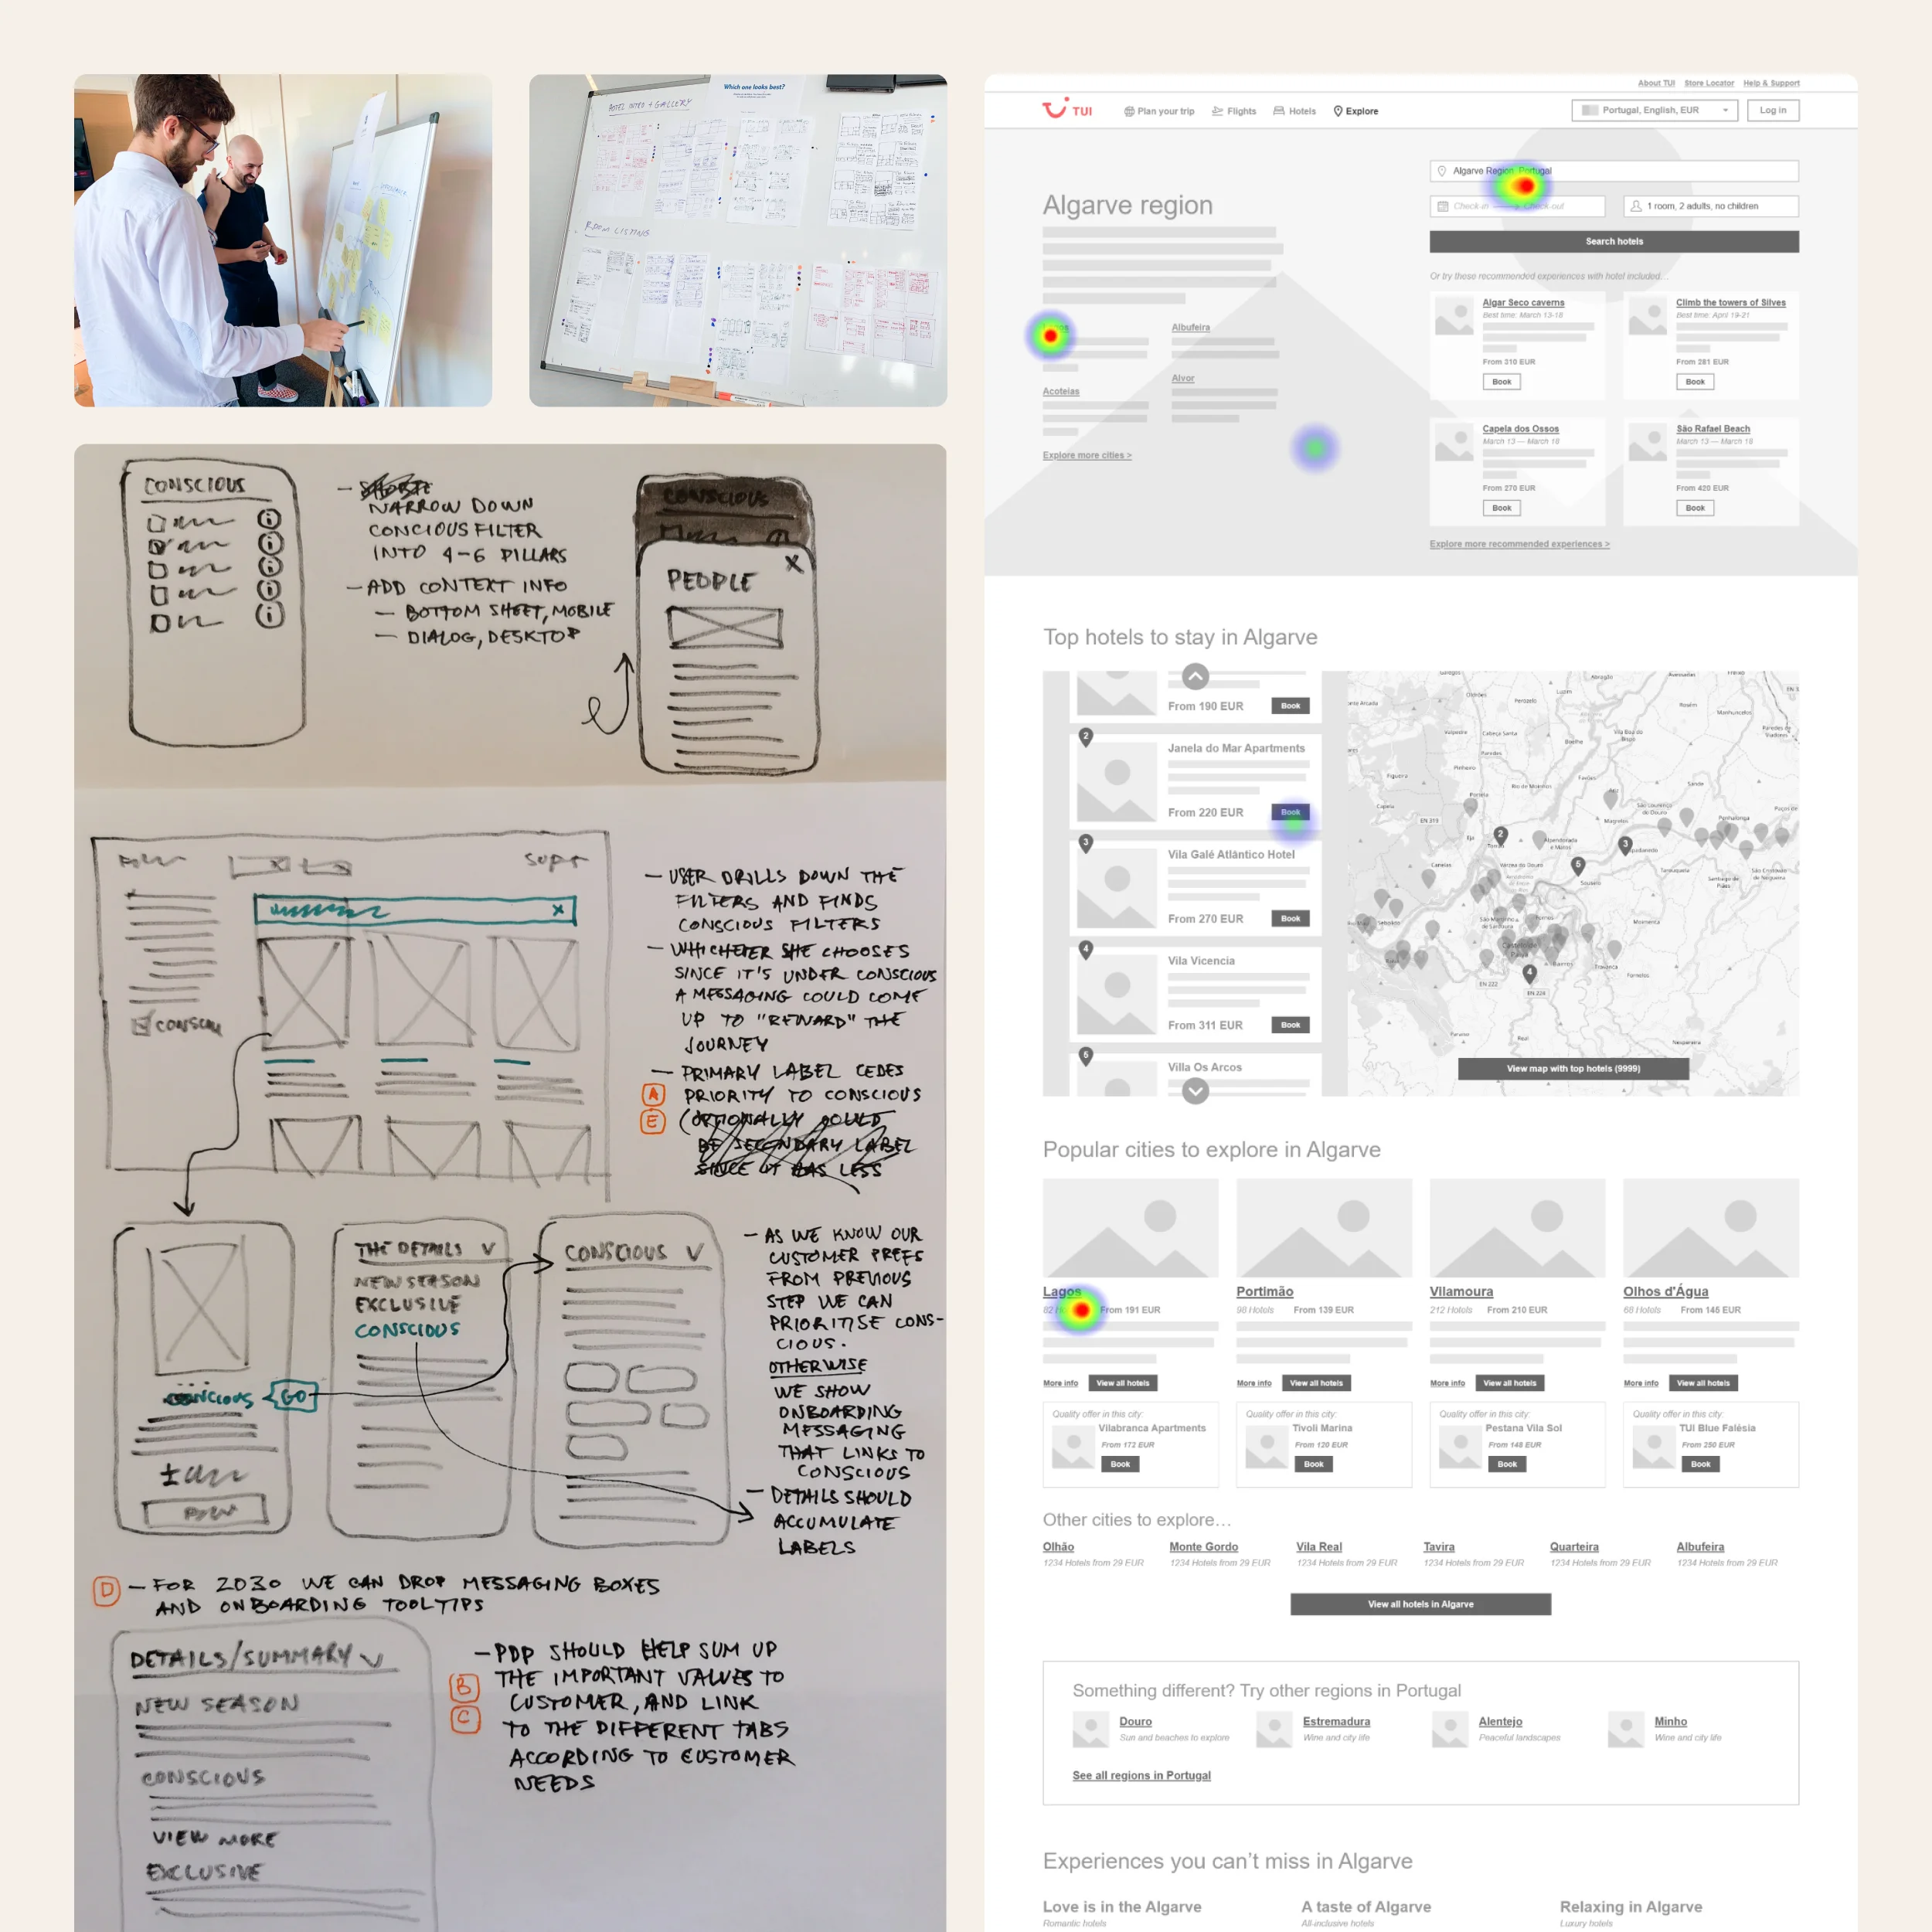 Compilation of wireframe scans. The first two are photos captured from a live whiteboarding session. The third is a sketched wireframe, and the last is a digital wireframe of a travel website referencing locations and hotels.